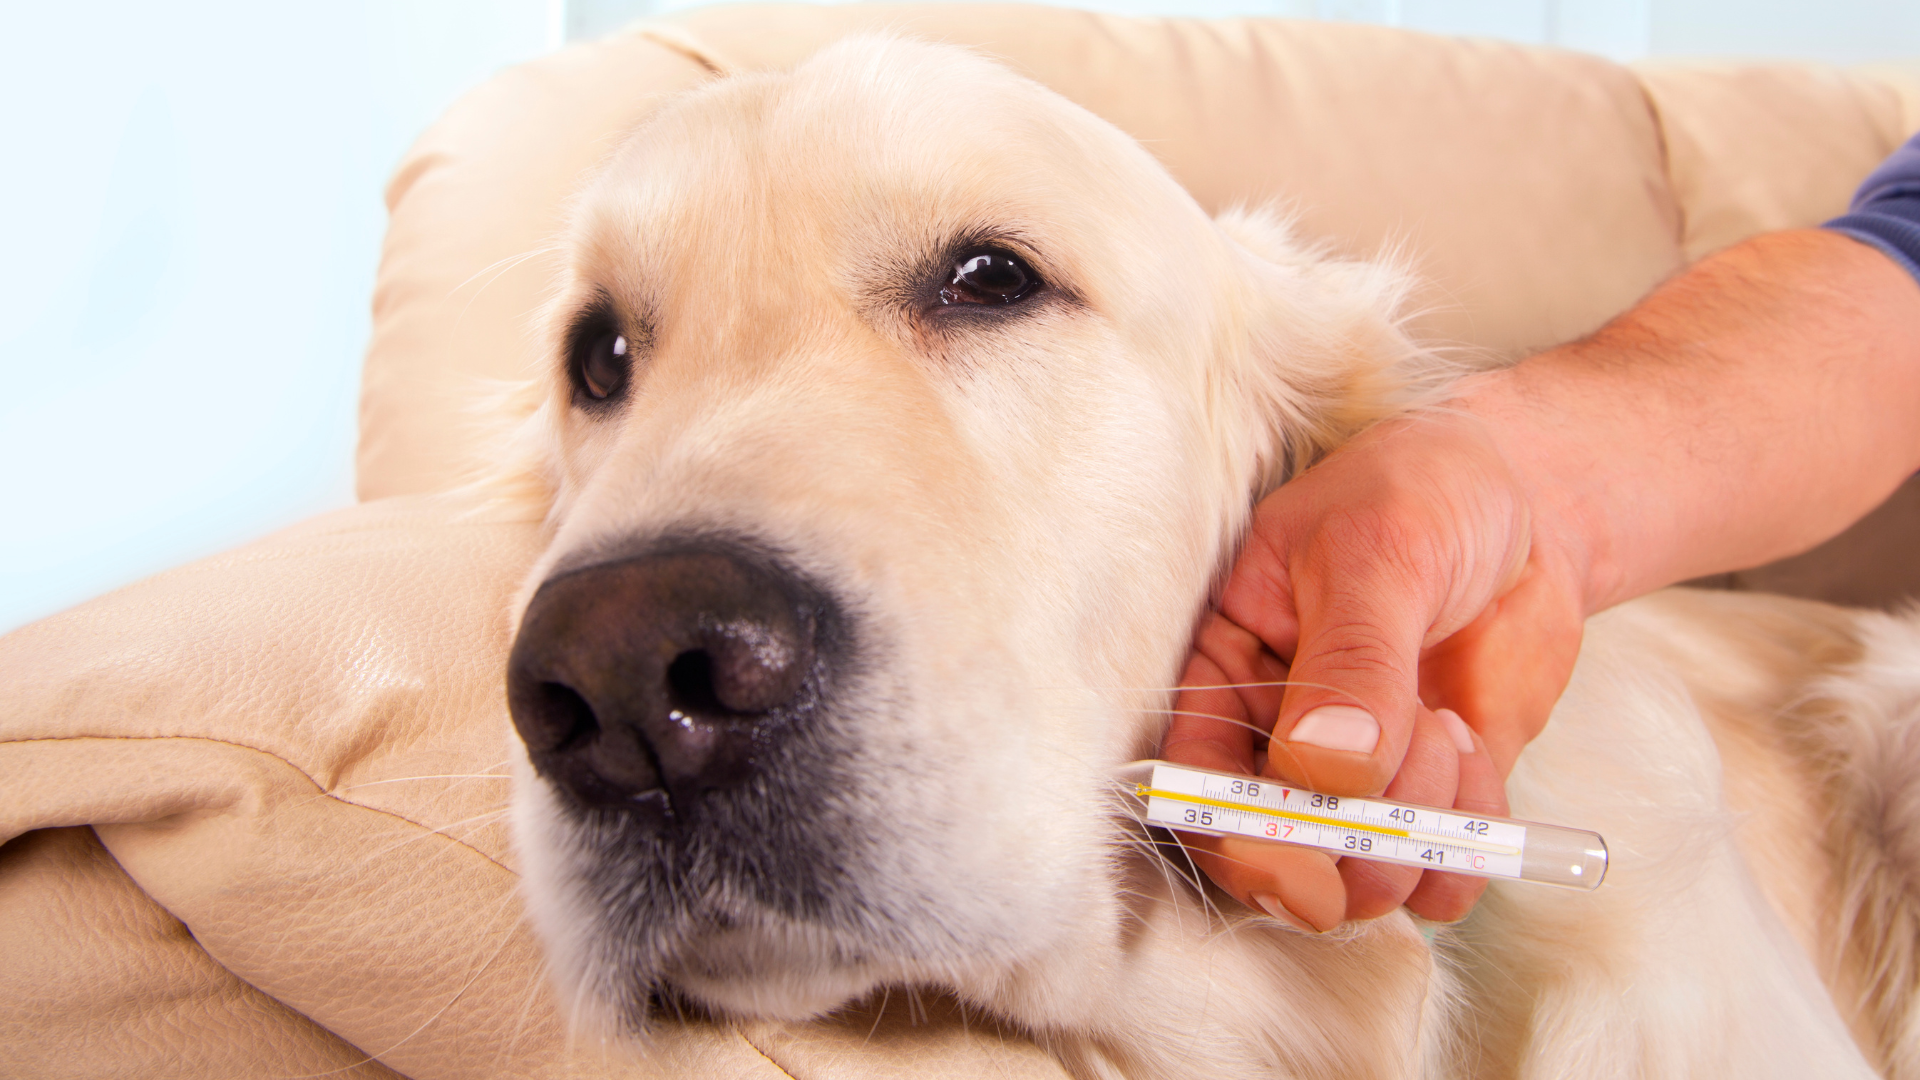 Signs Your Dog Needs Emergency Vet Care